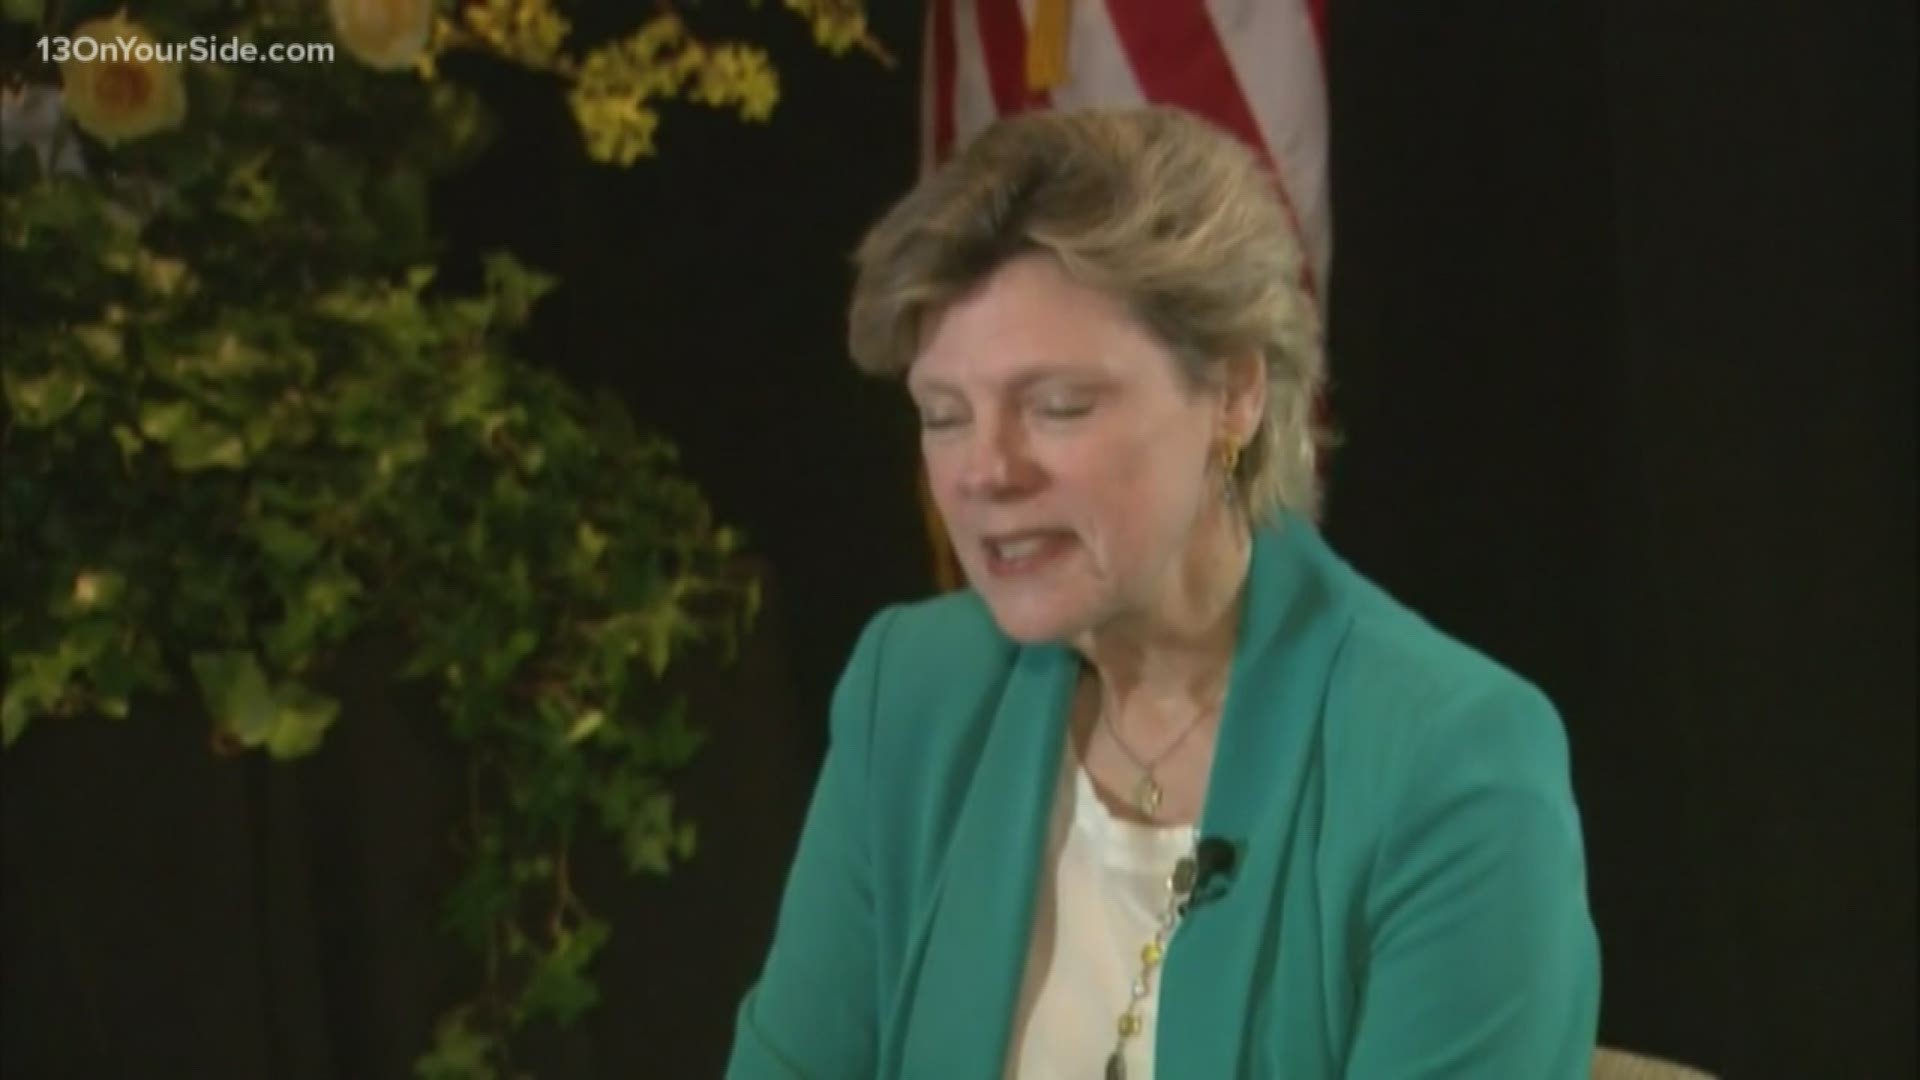 Val Lego talks about her interview with Cokie Roberts